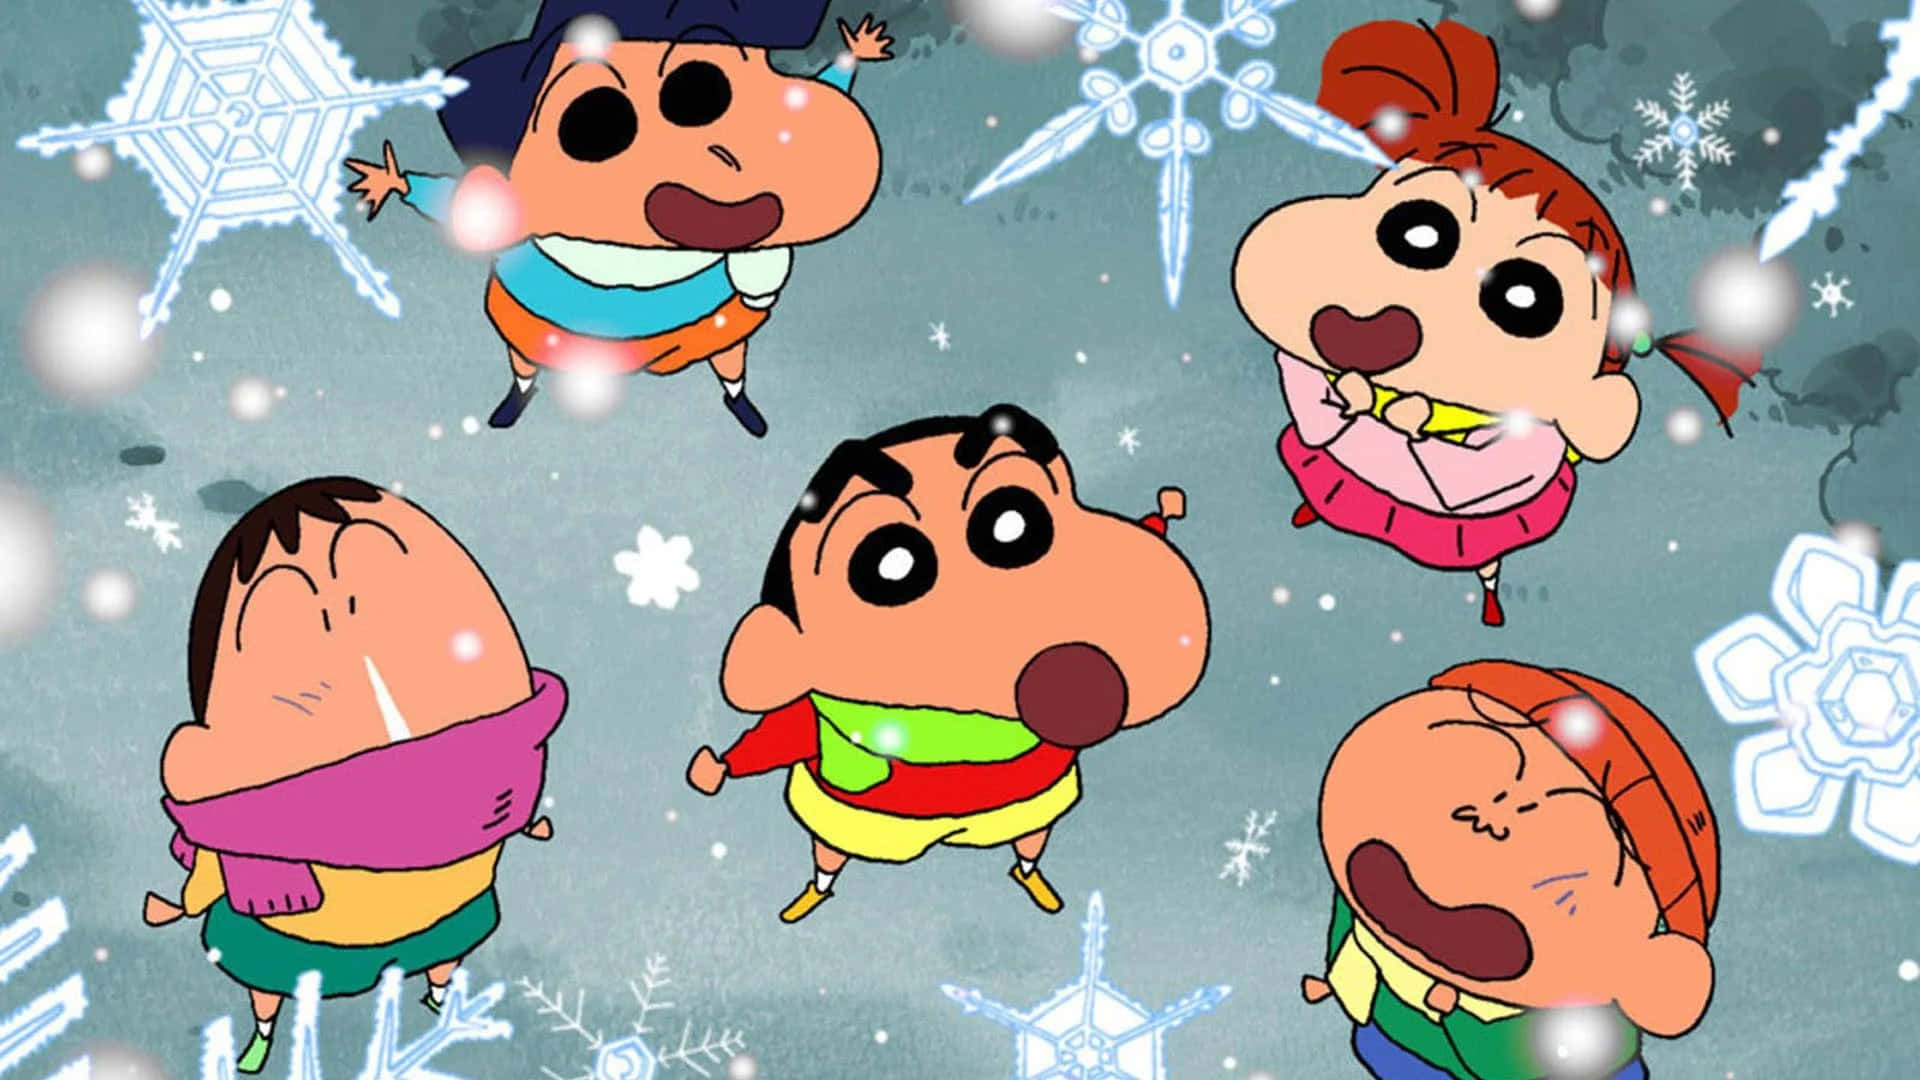 Cute Crayon Shin Chan on an exciting adventure